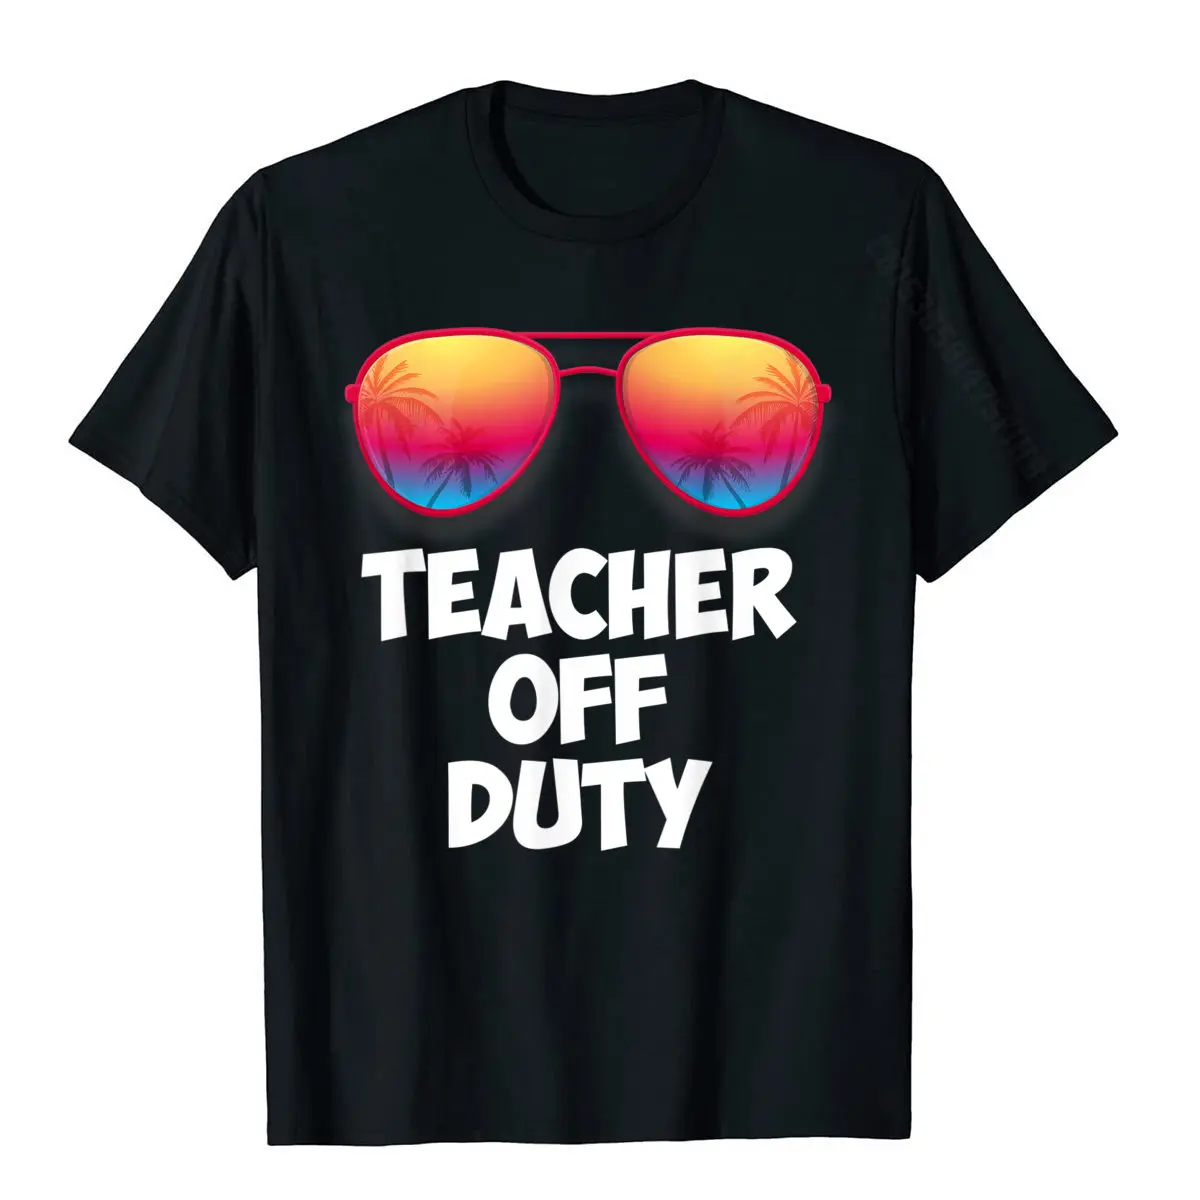 Funny OFF DUTY TEACHER Shirt Great Last Day Of School Gift T-Shirt Tops Tees Latest Funny Cotton Mens Tshirts Geek